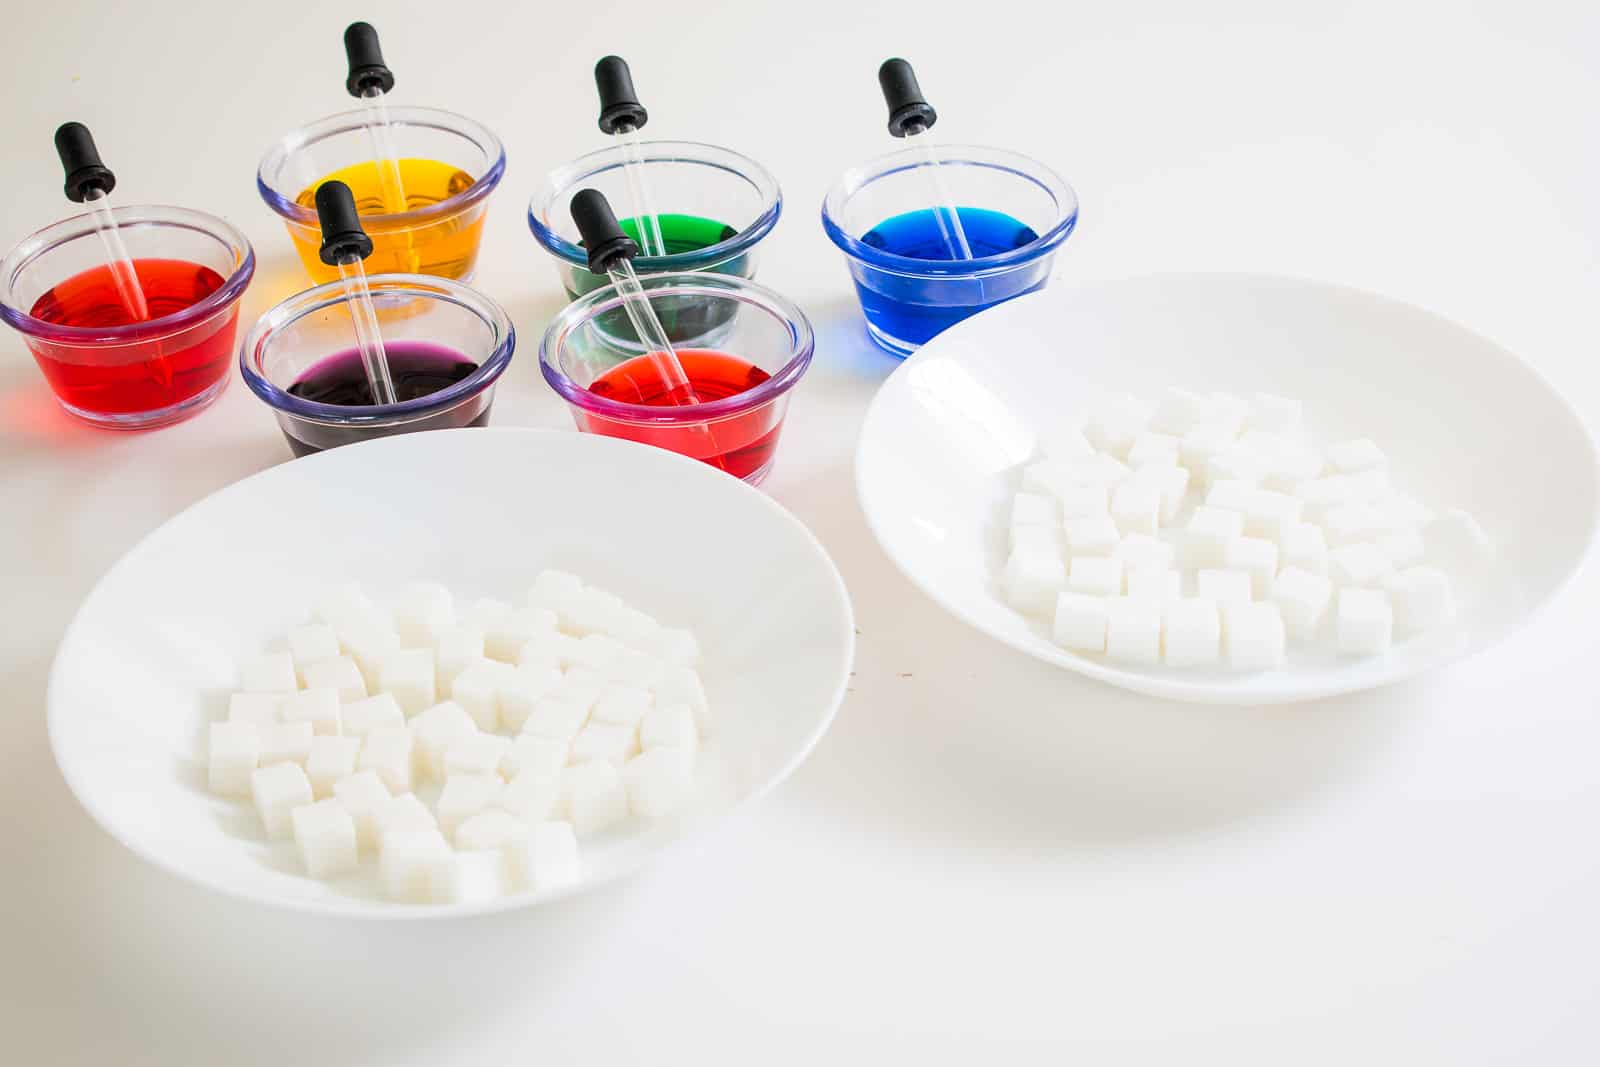 sugar cubes with food coloring